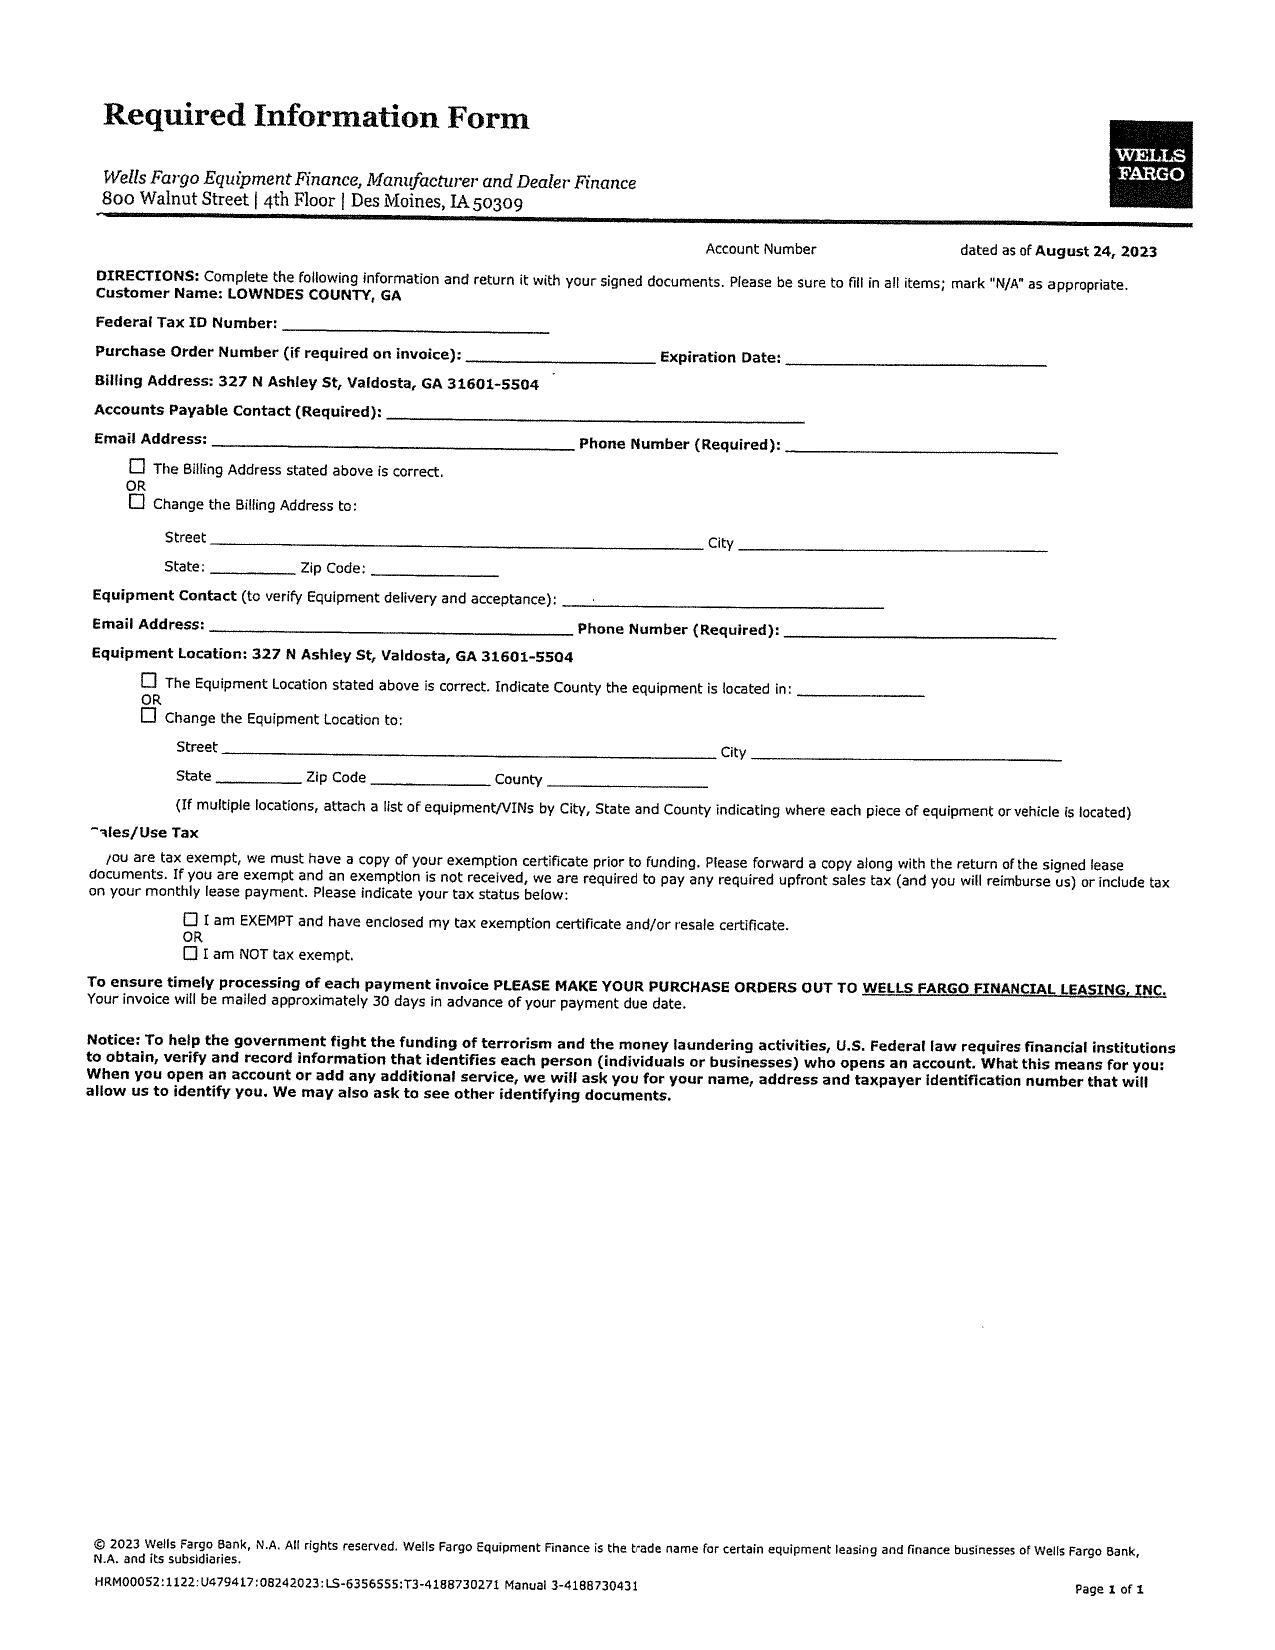 Required Information Form